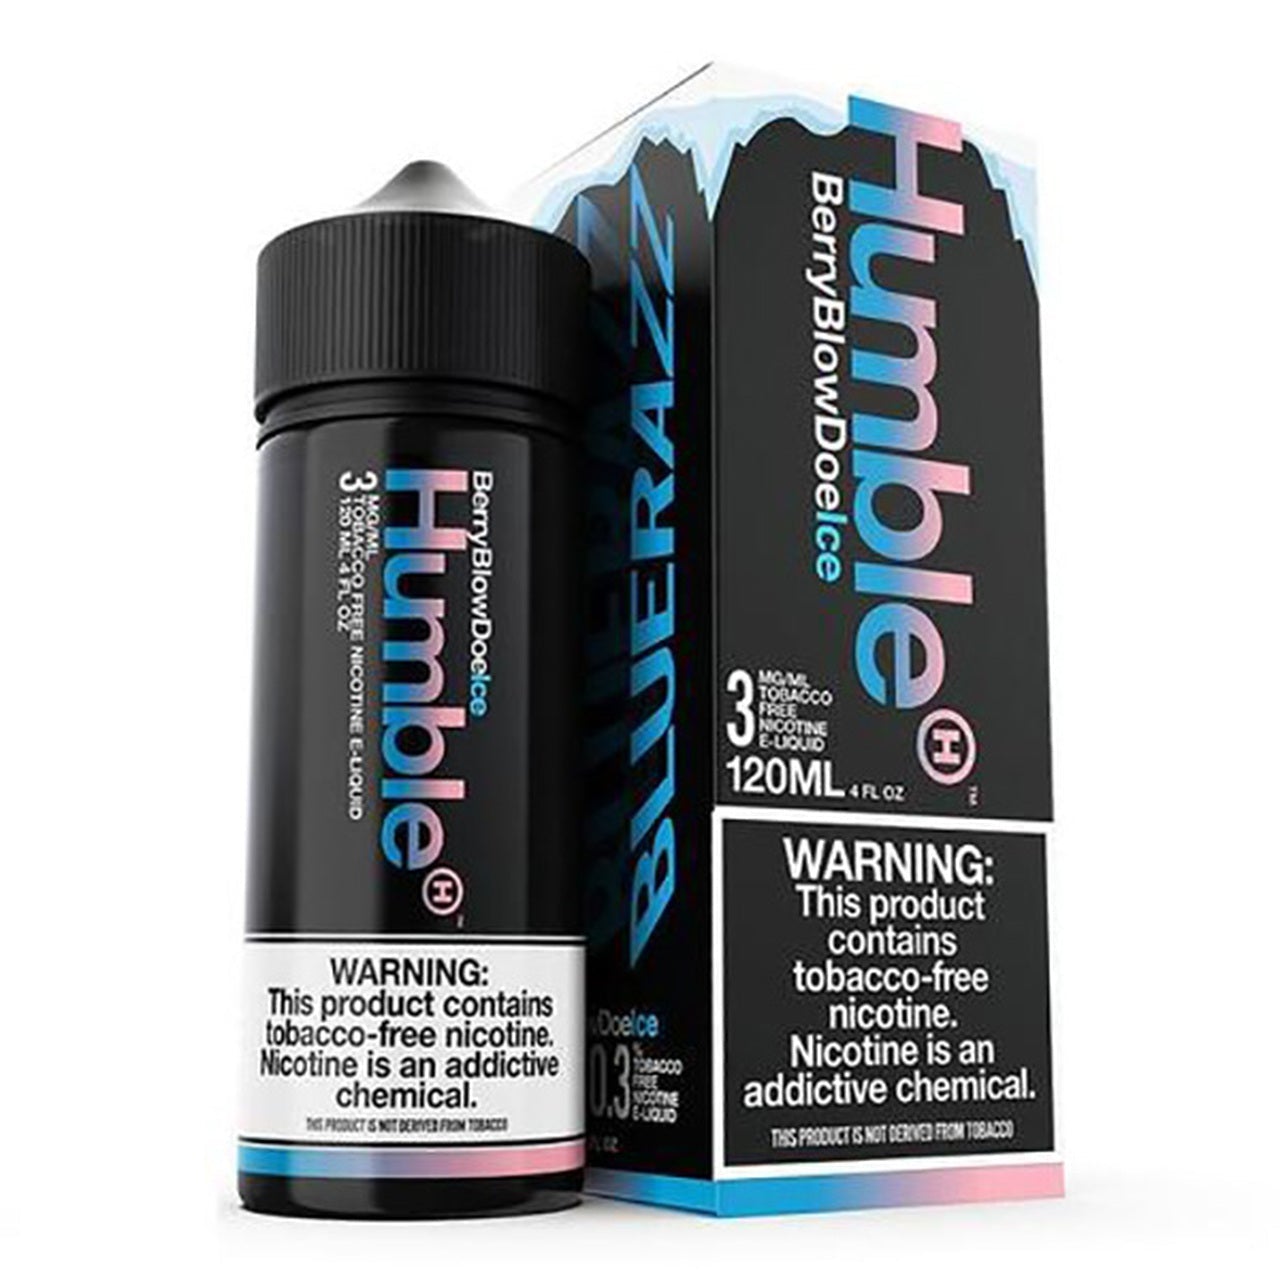 Berry Blow Doe Ice Tobacco-Free Nicotine By Humble 120ML with Packaging